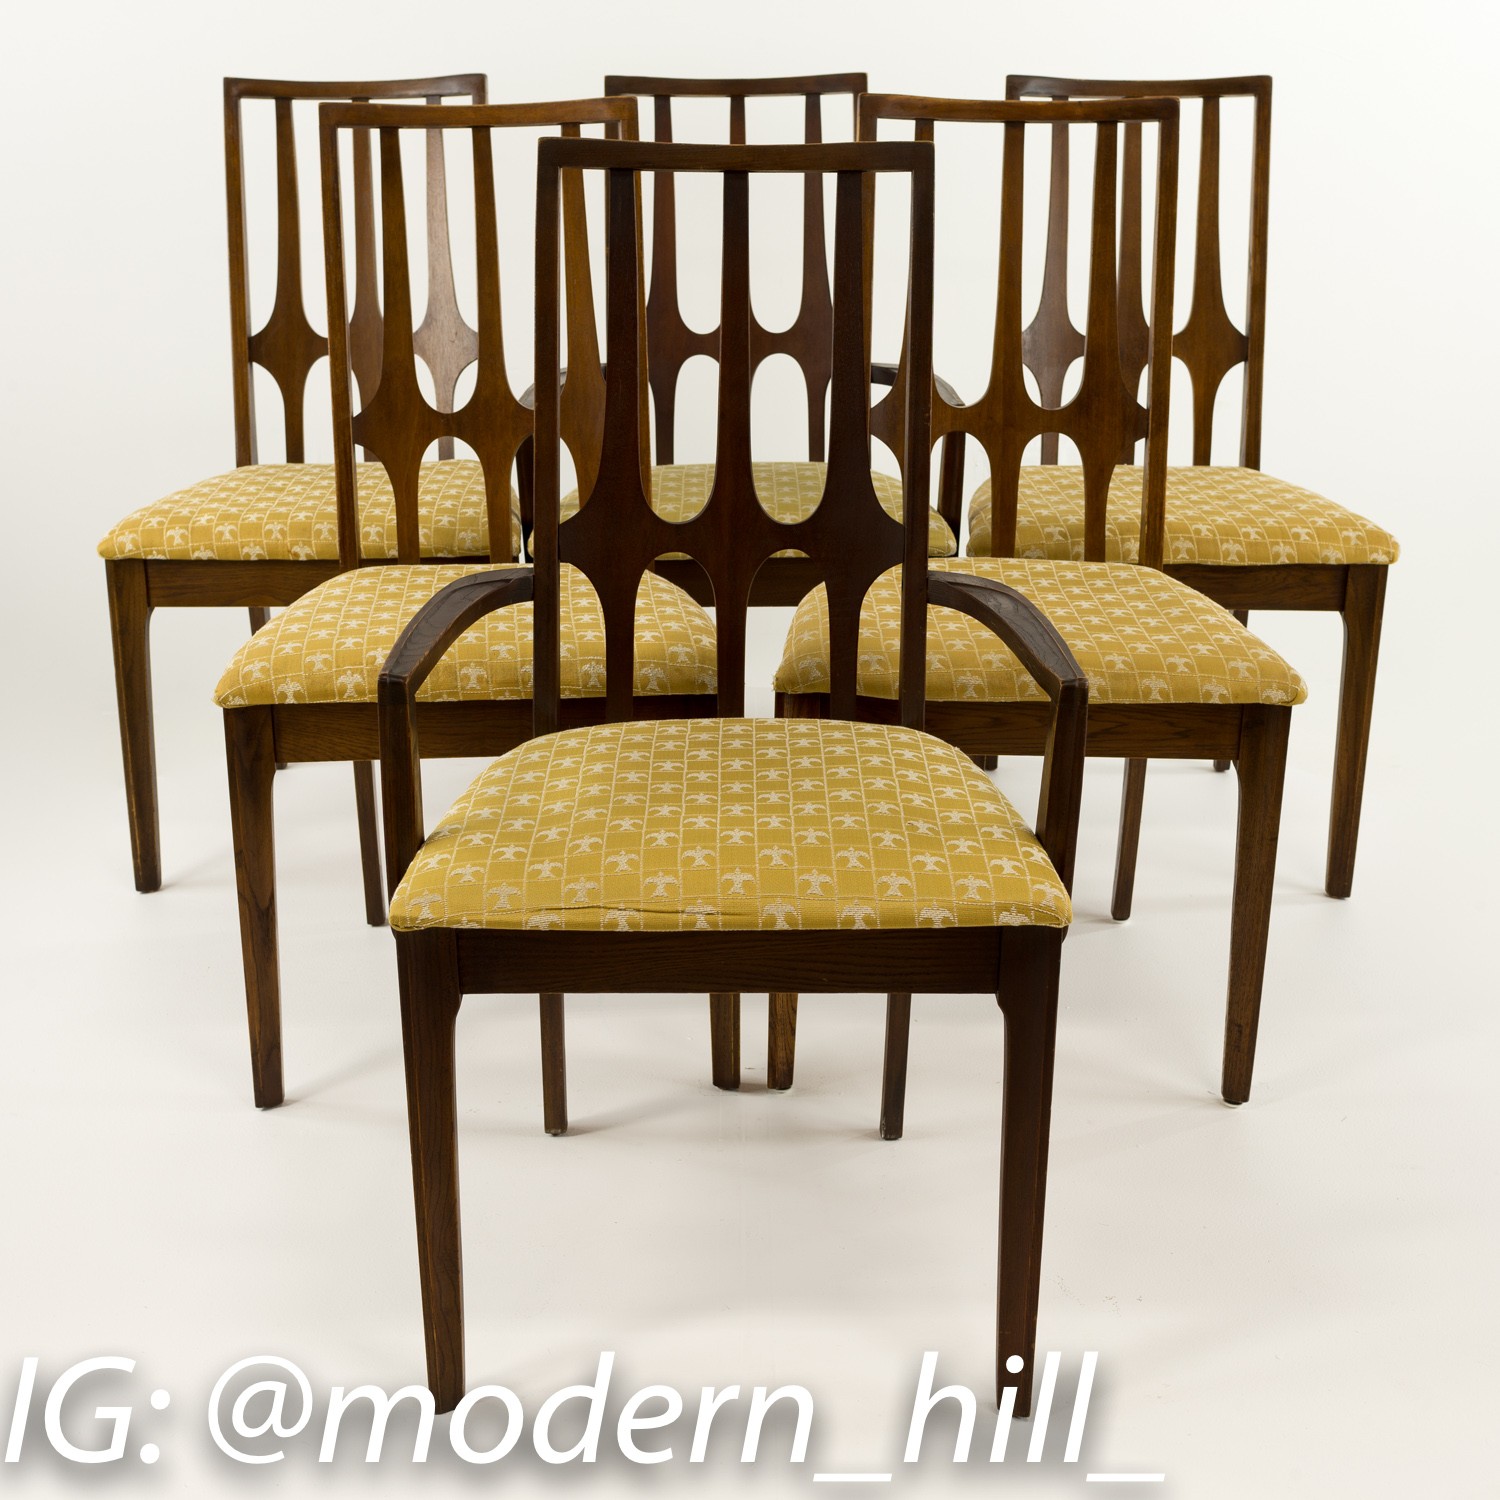 Broyhill Brasilia Round Dining Table and Dining Chairs - Set of 6